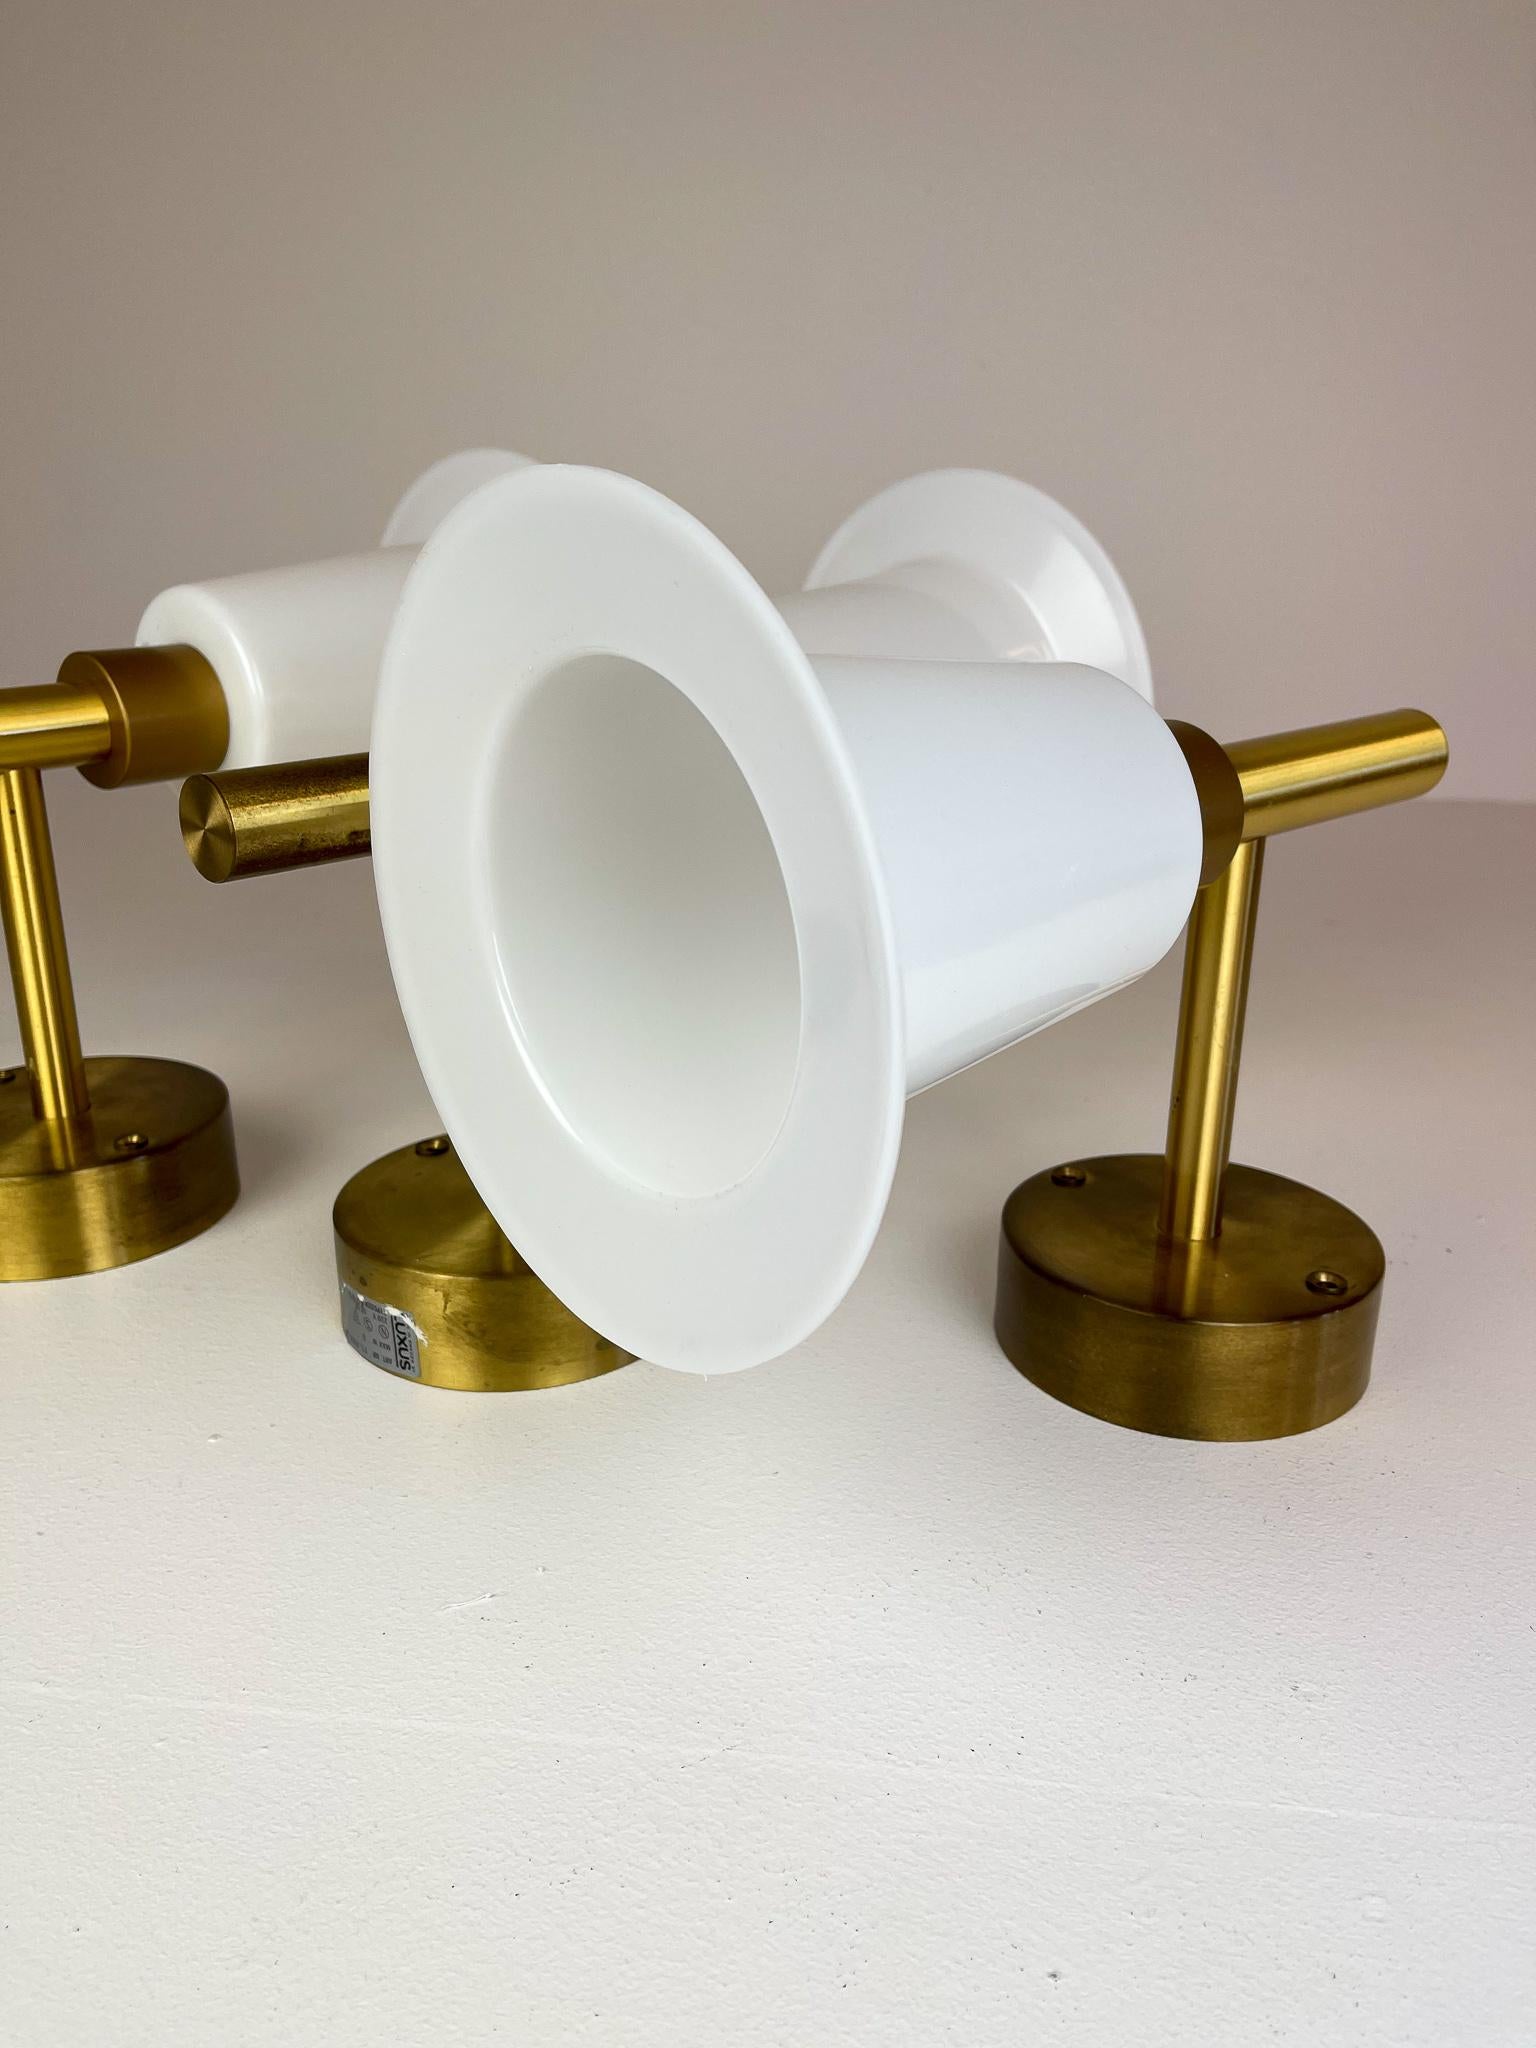 Midcentury Wall-Mounted Brass and Acrylic Lamps Luxus, Sweden, 1960s For Sale 5